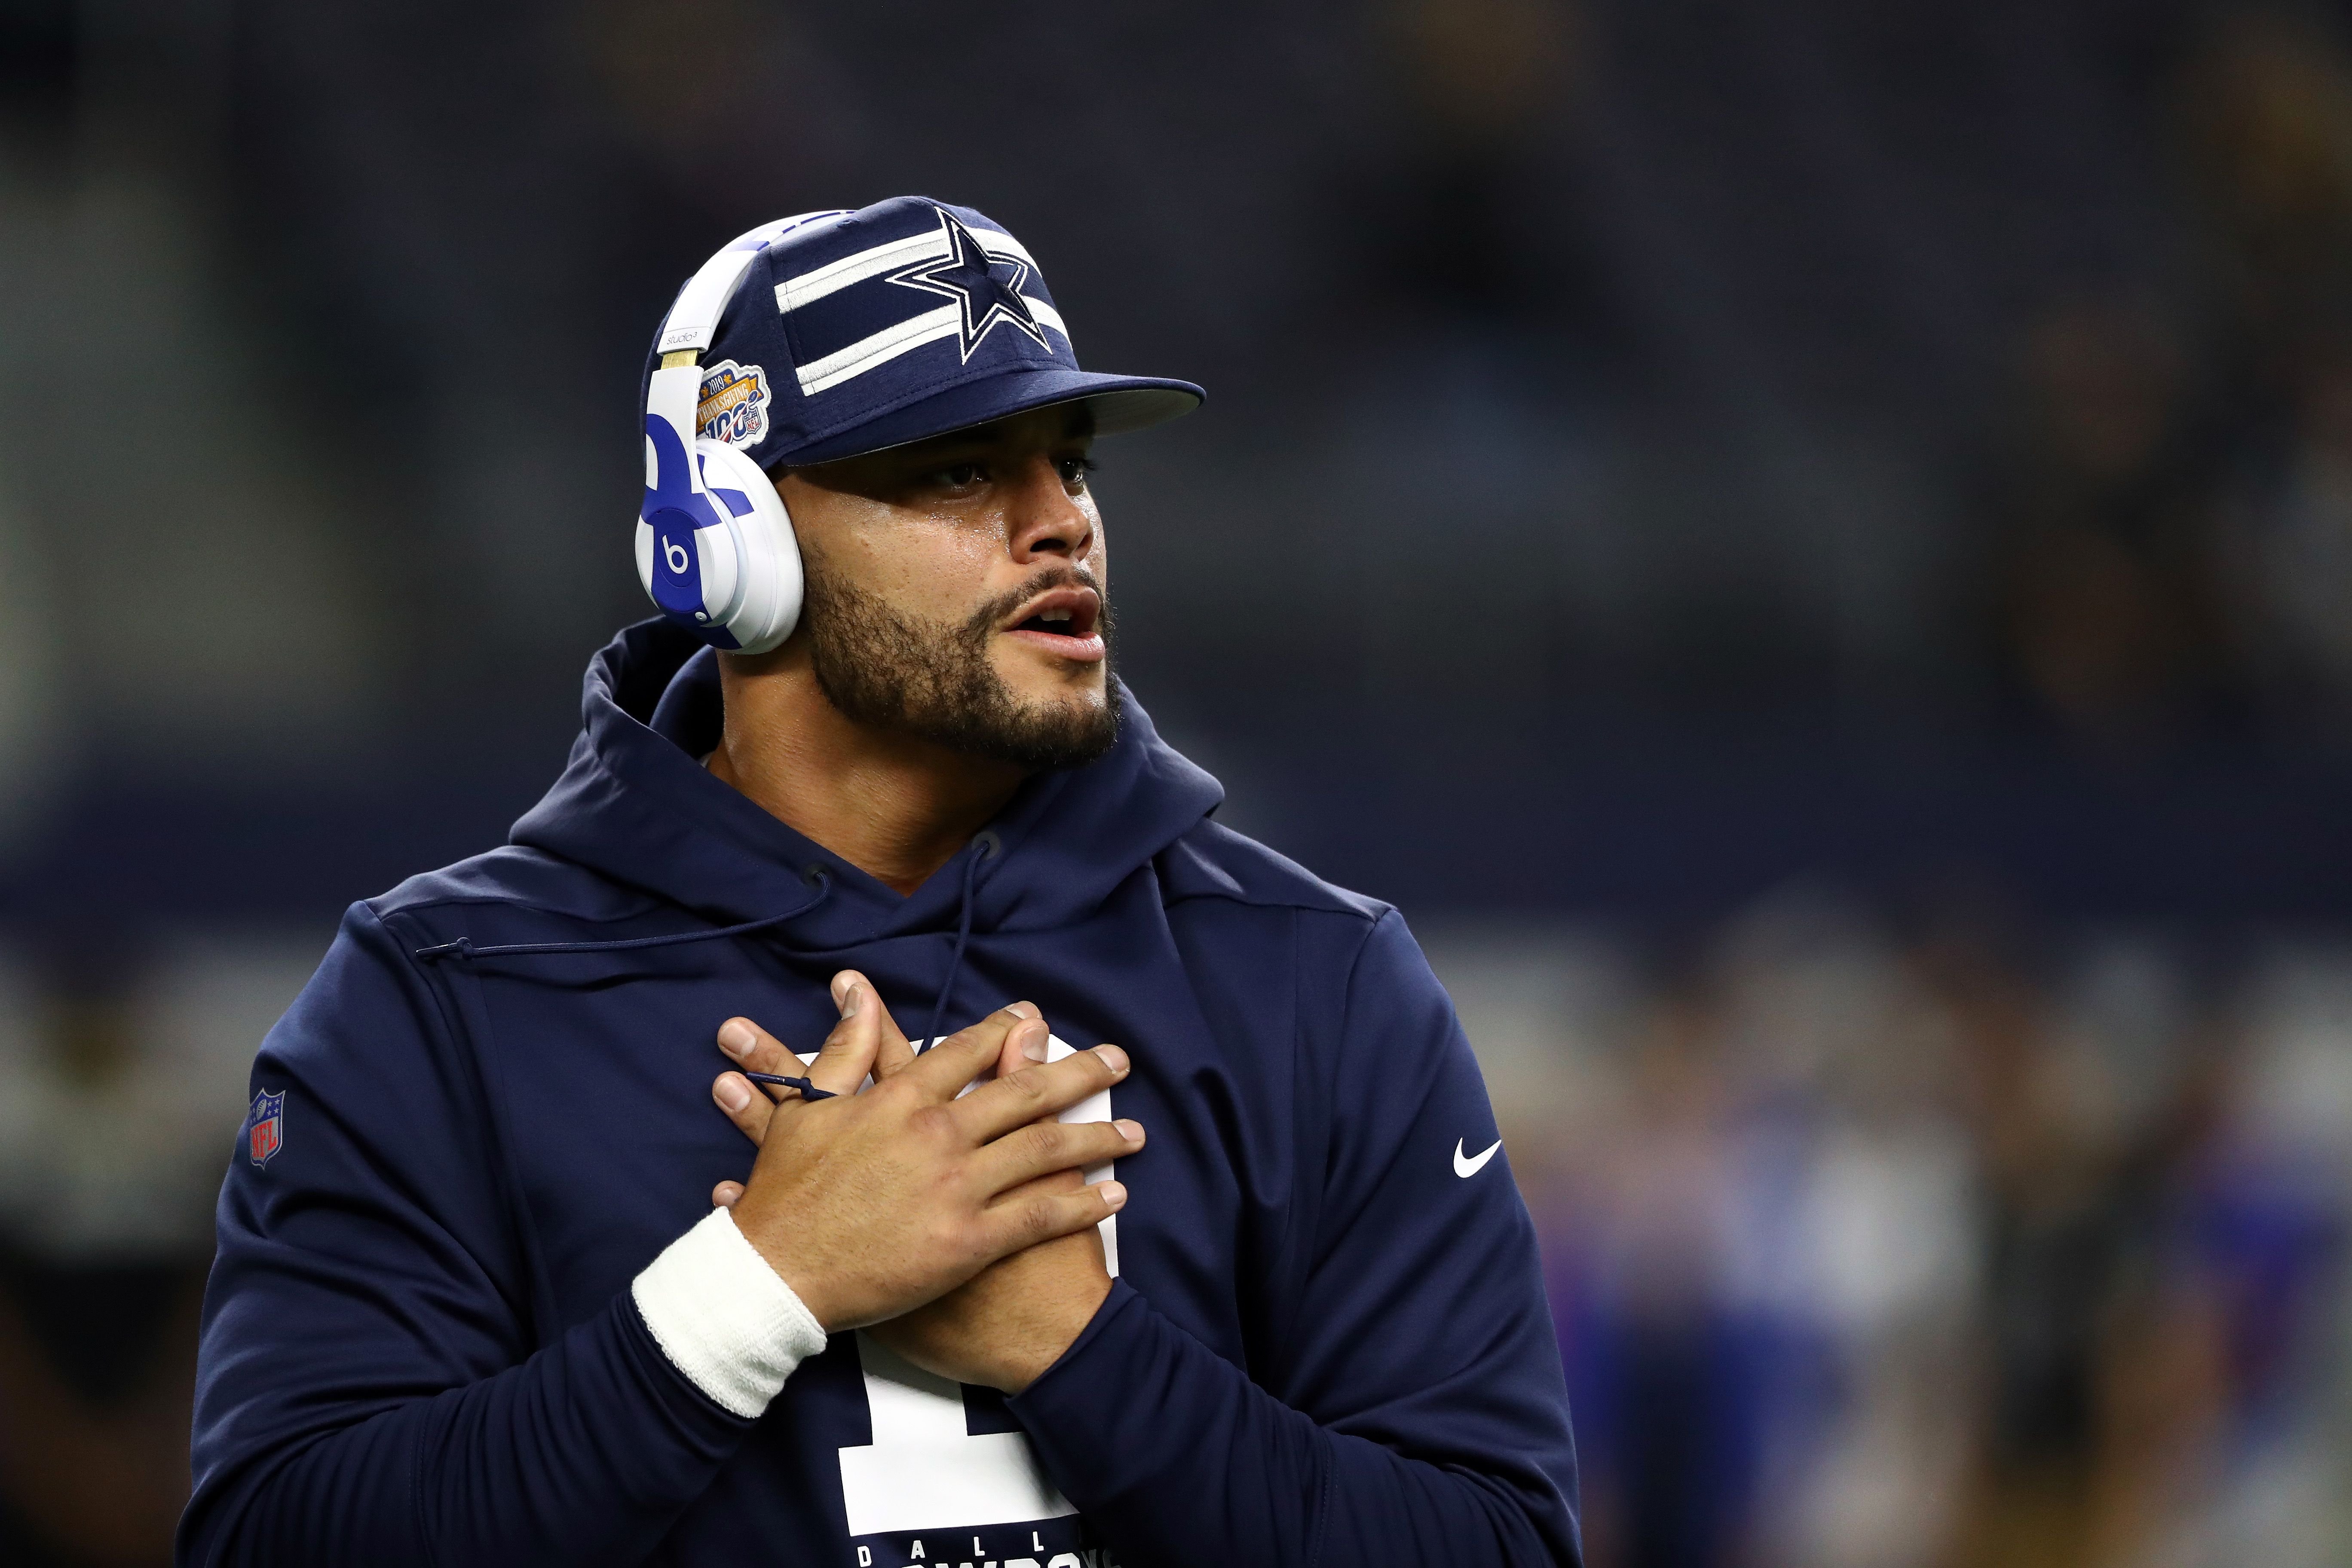 Dak Prescott #4 of the Dallas Cowboys warms up before a game against the Buffalo Bills at AT&T Stadium on November 28, 2019 in Arlington, Texas. | Source: Getty Images